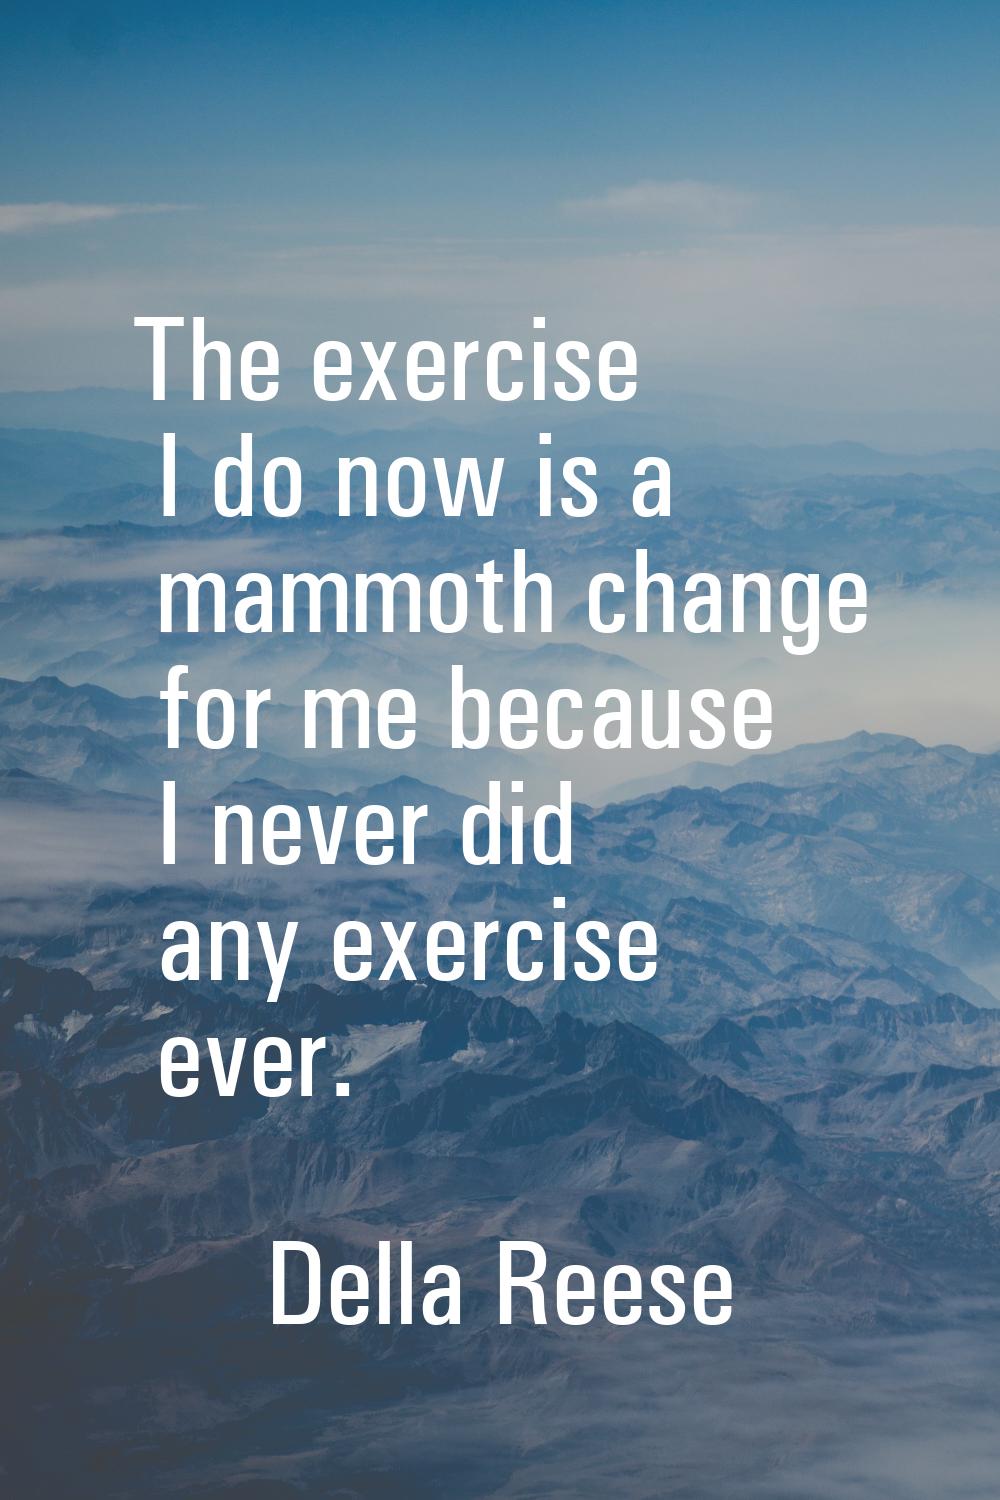 The exercise I do now is a mammoth change for me because I never did any exercise ever.